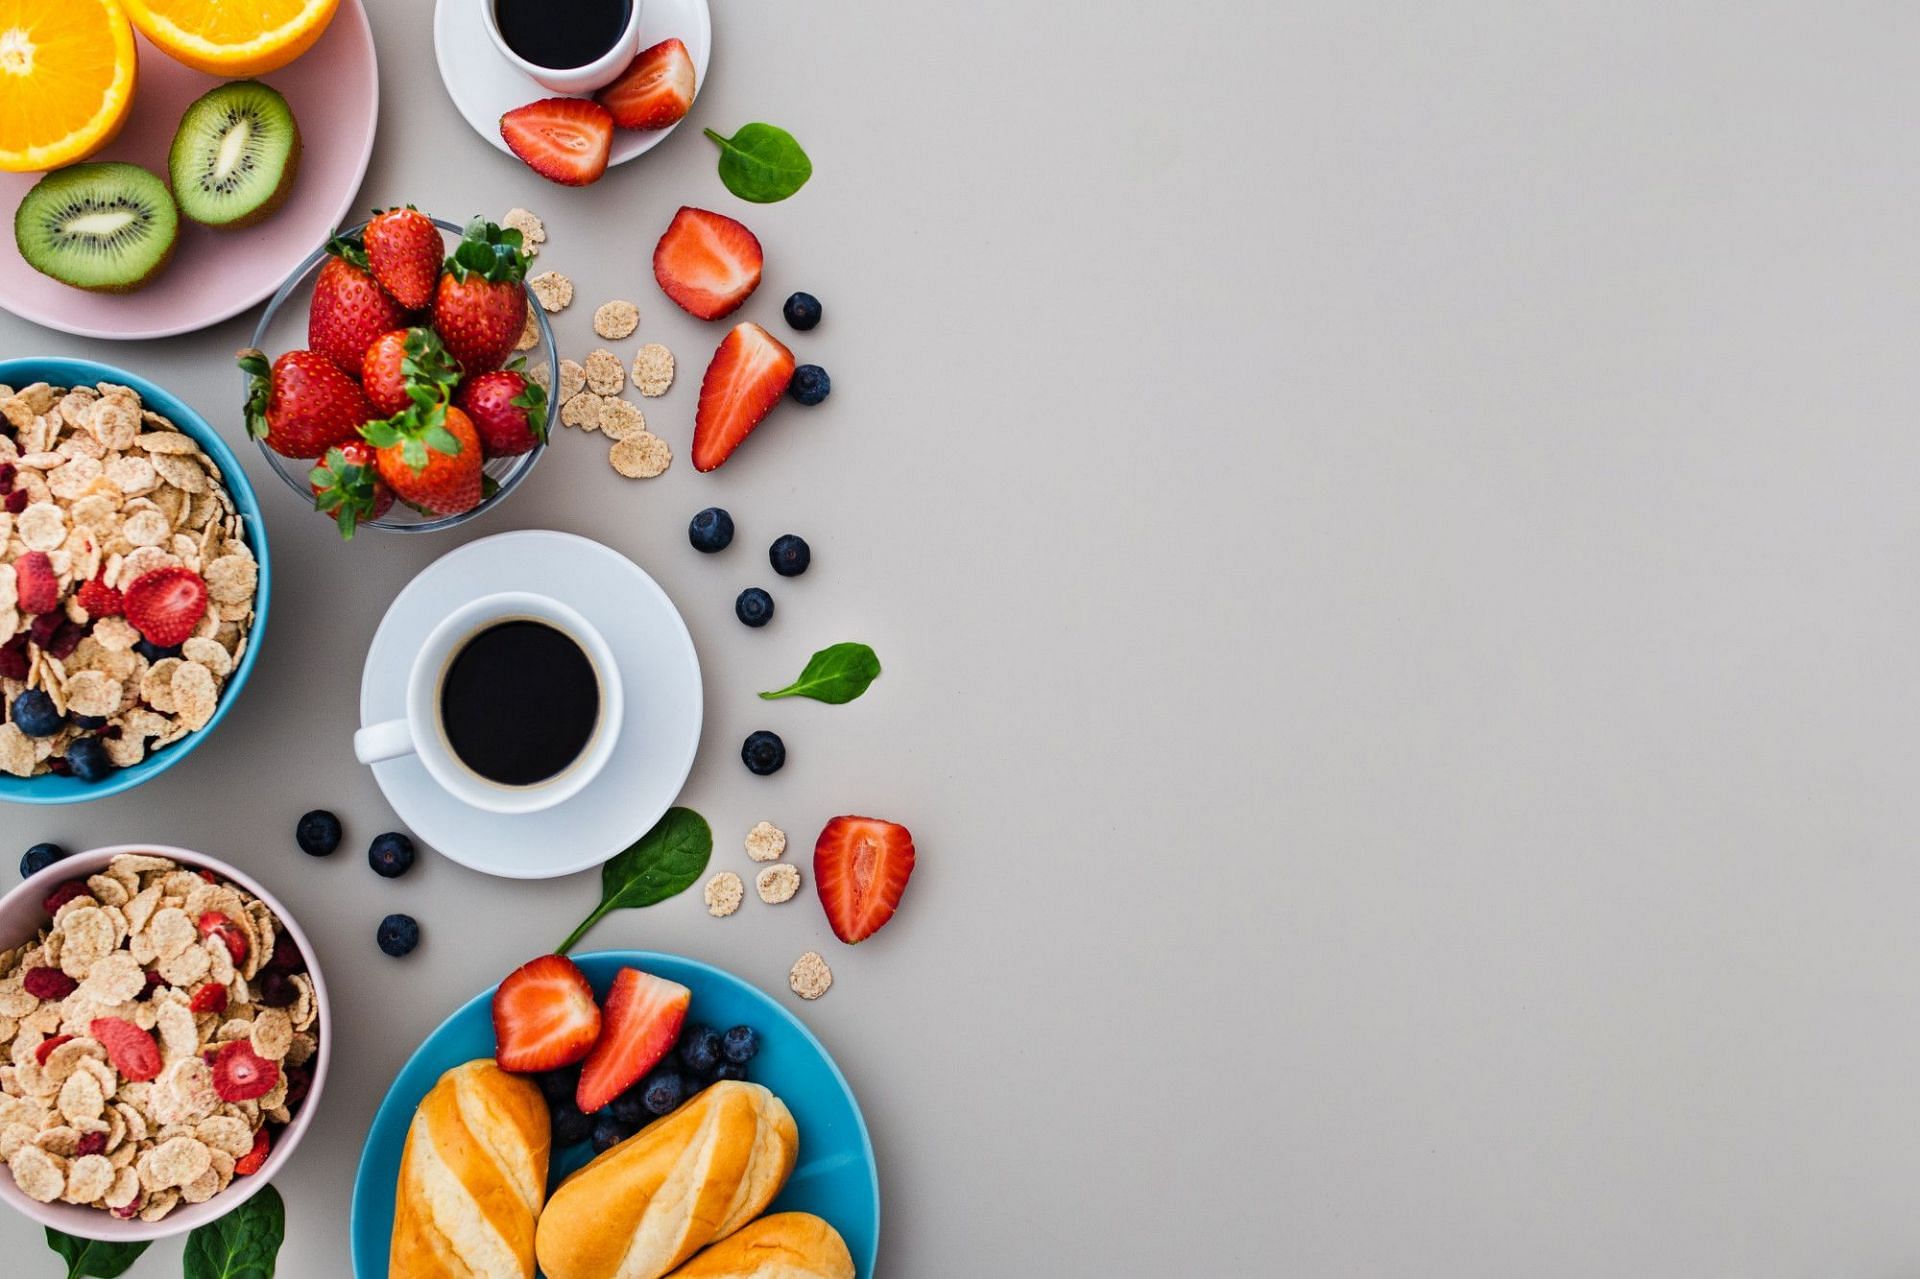 A balanced diet is important for a good start to the day (Image by denamorado on Freepik)